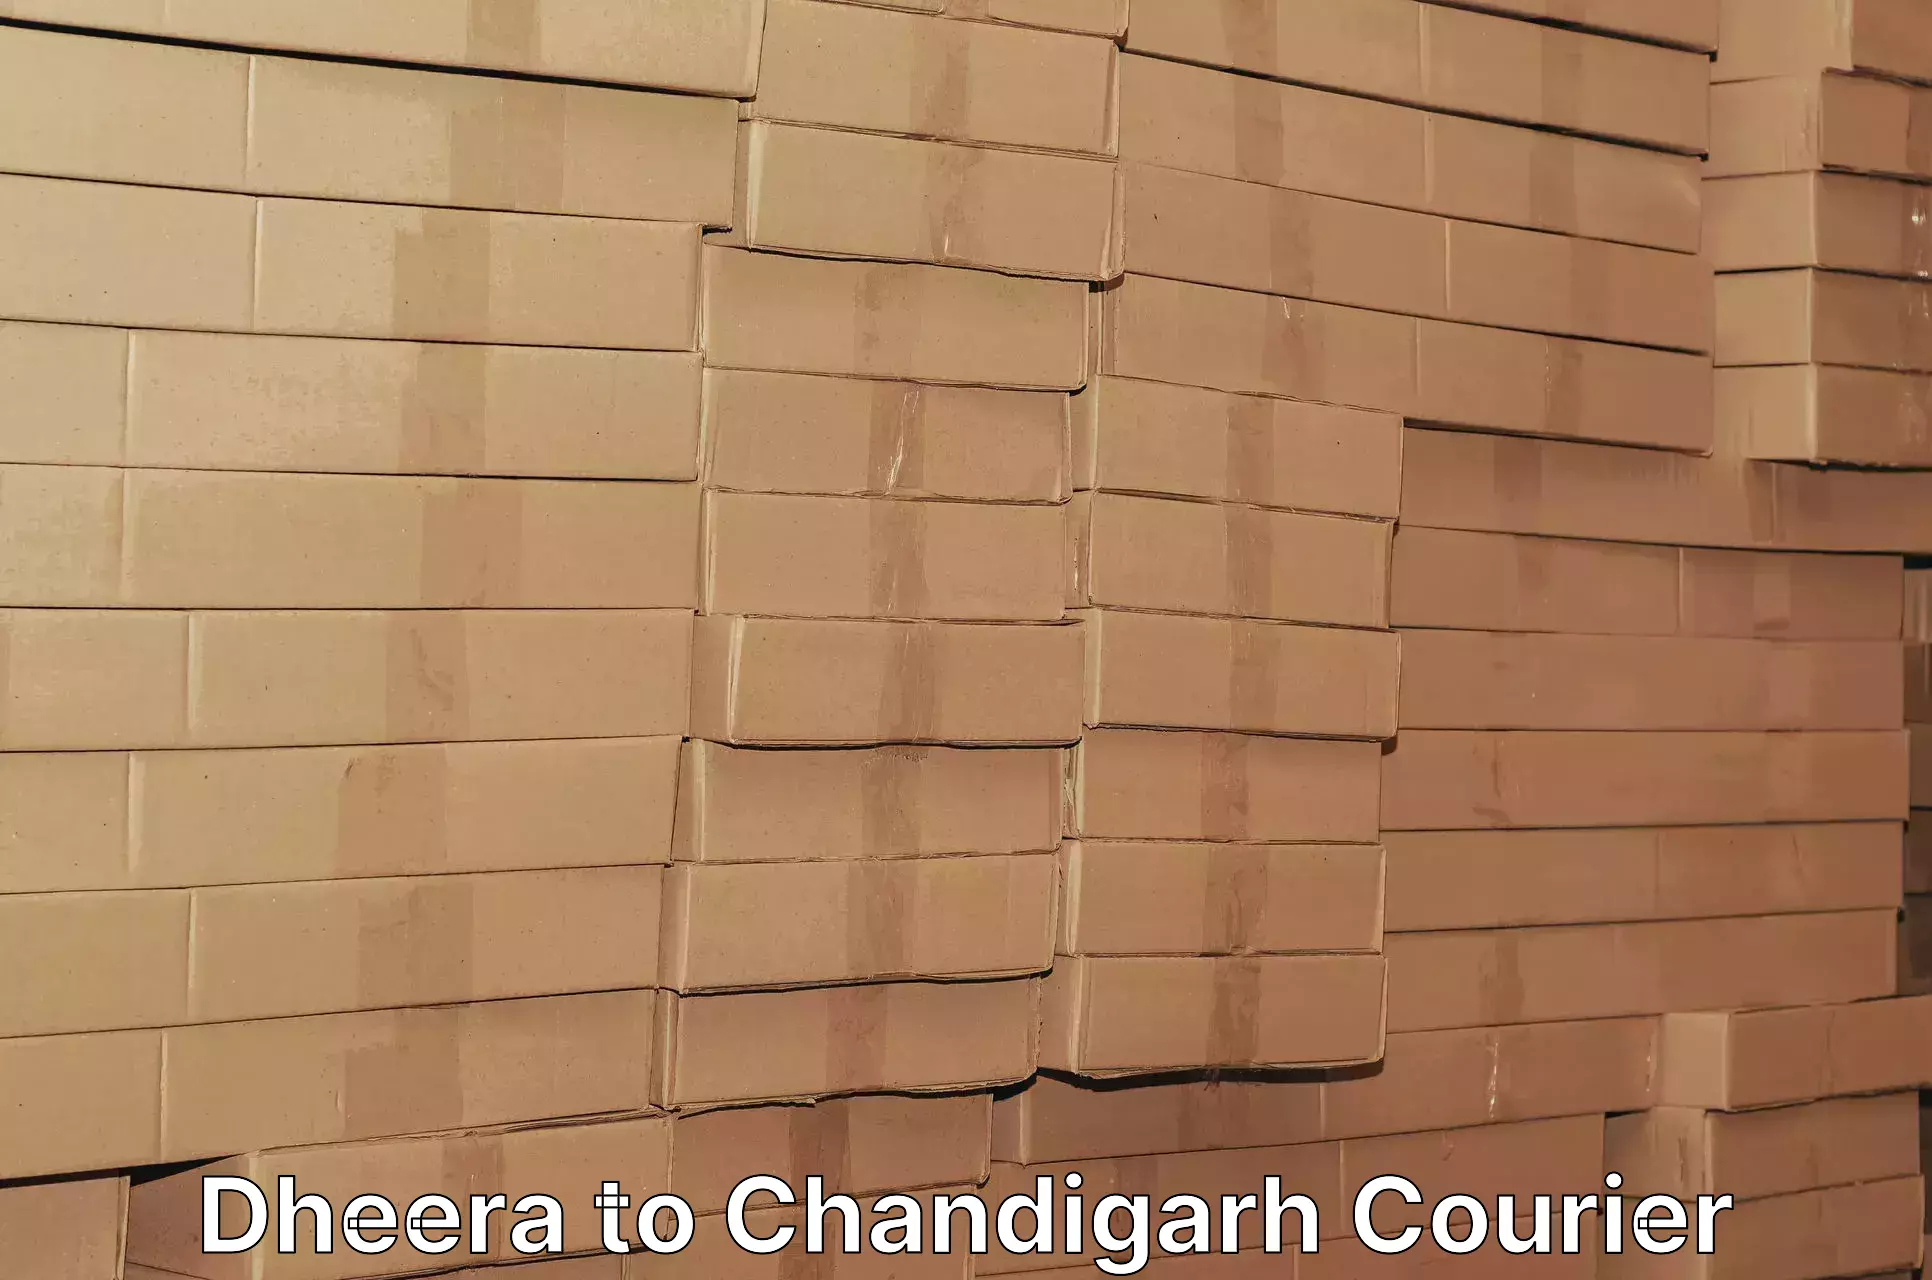 24-hour courier service Dheera to Chandigarh